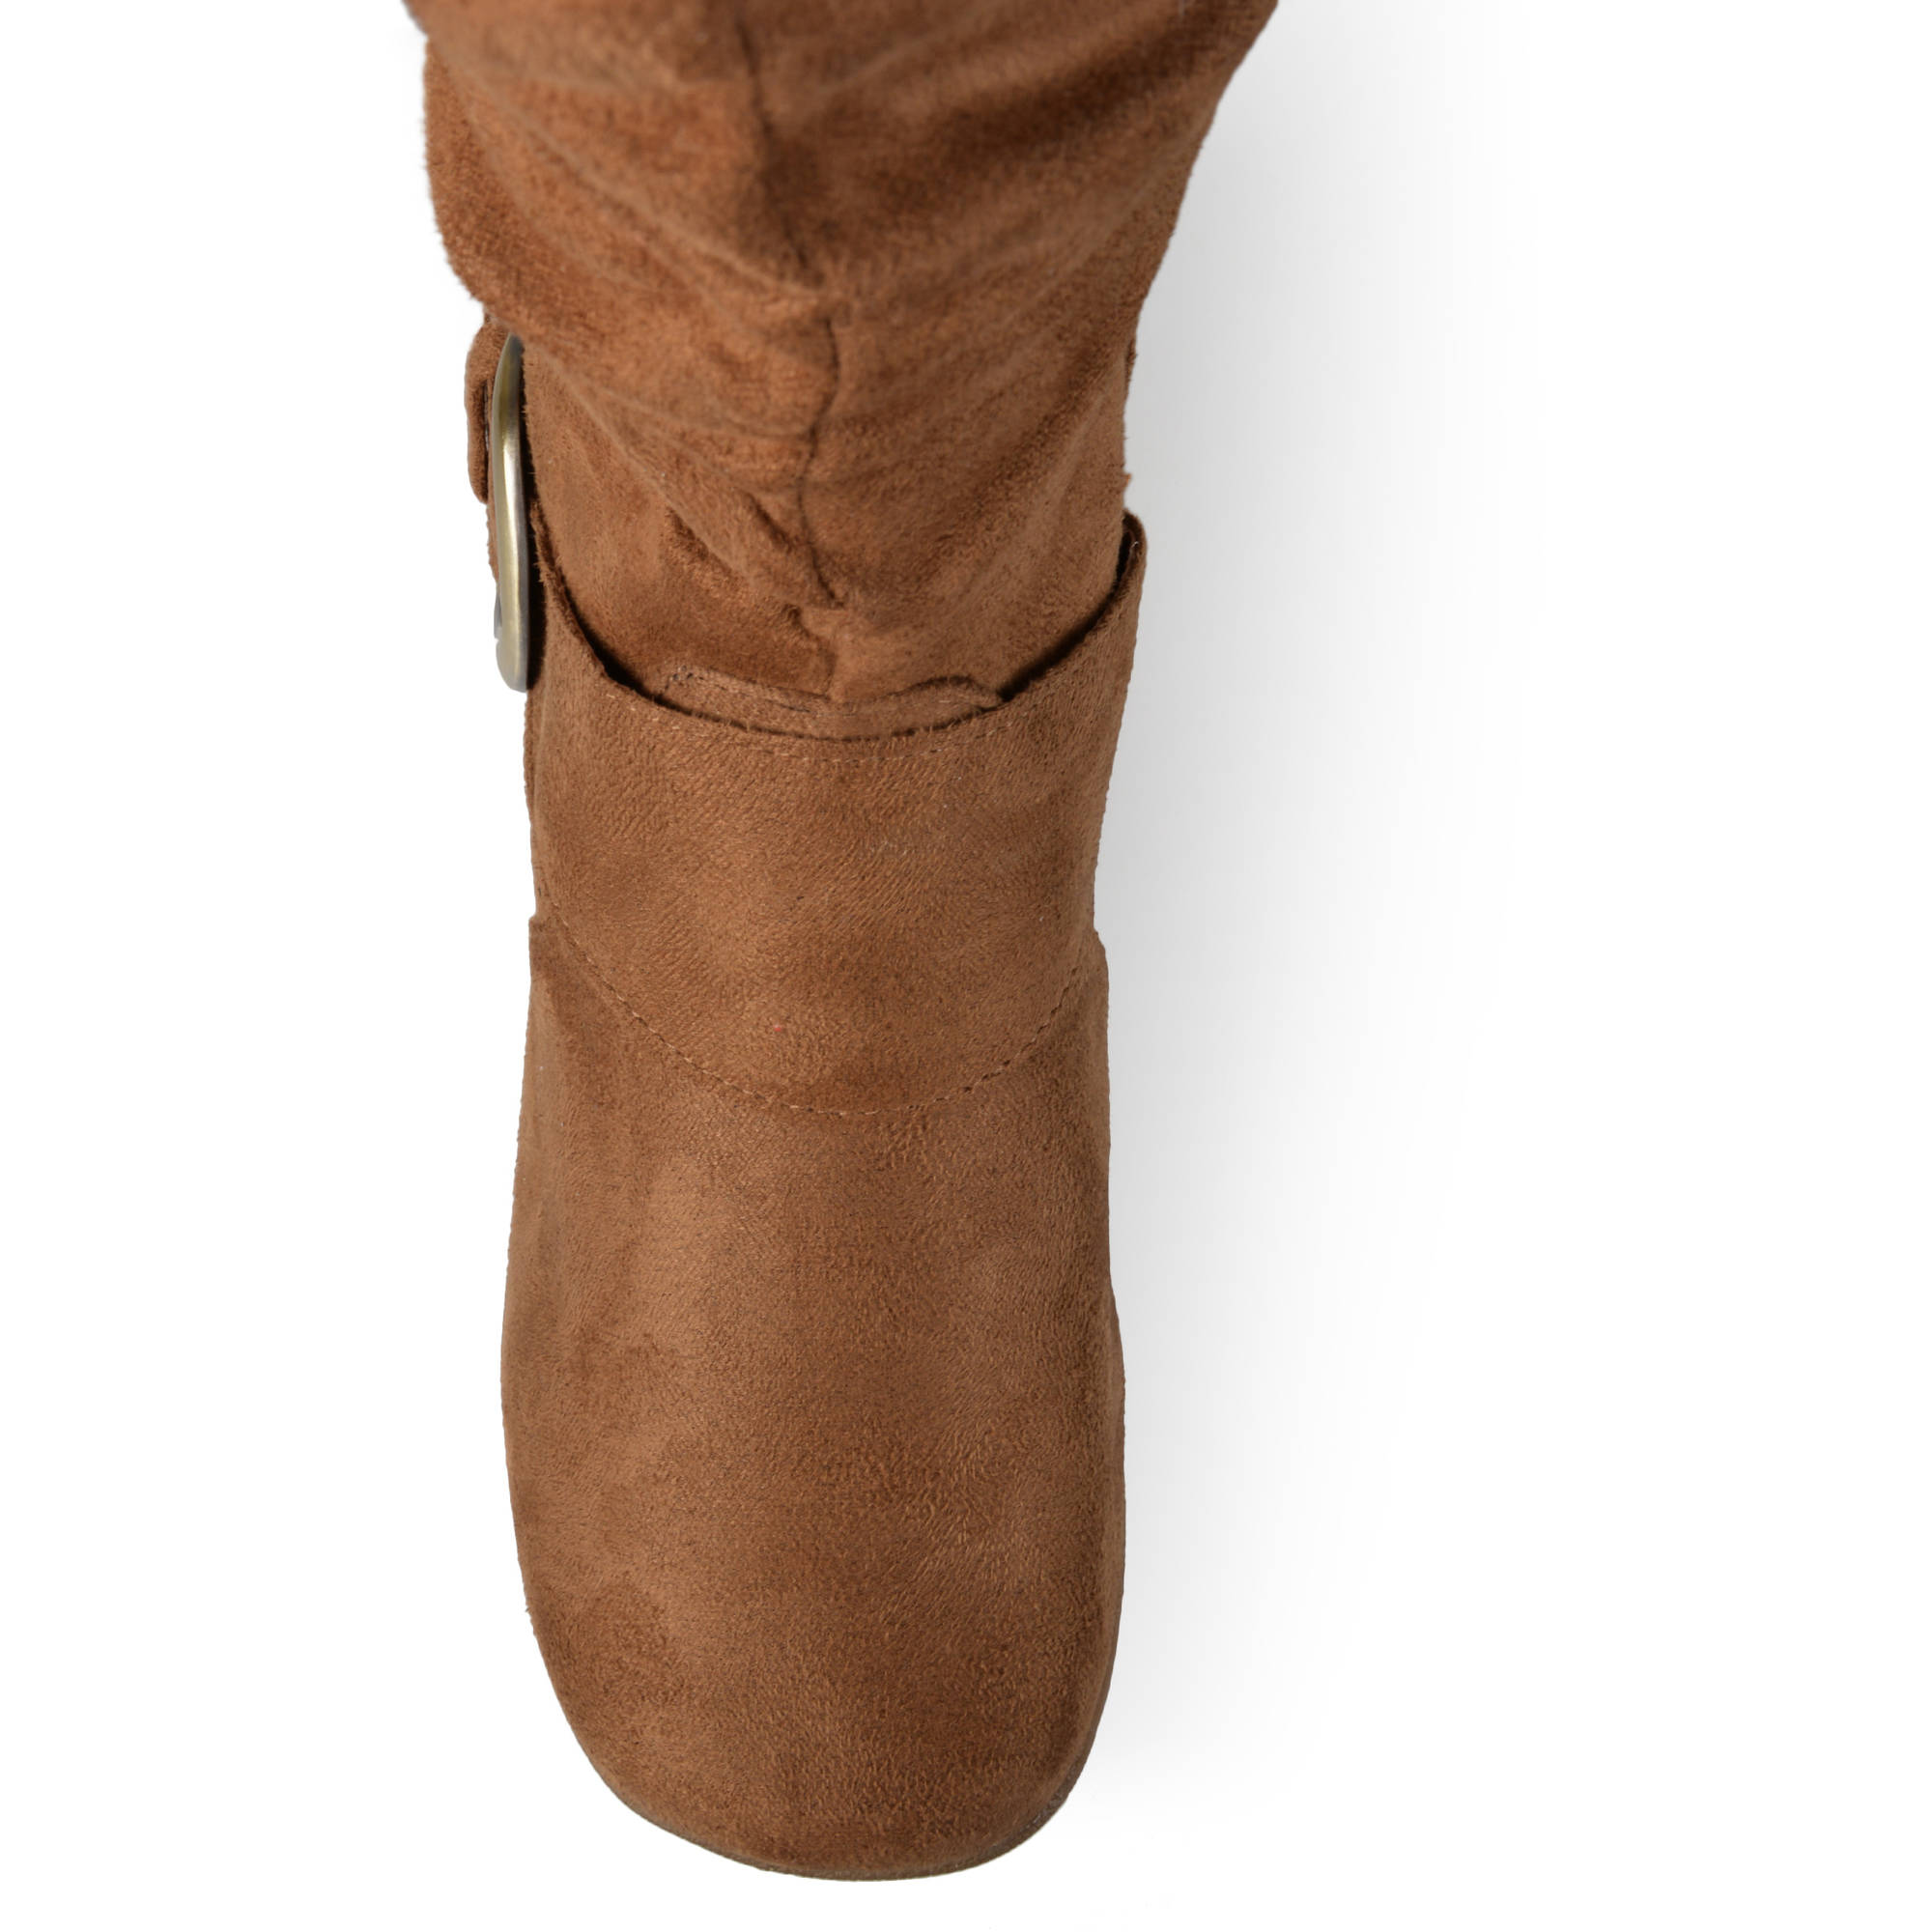 Brinley Co. Women's Buckle Accent Slouchy Mid-Calf Boots - image 4 of 9